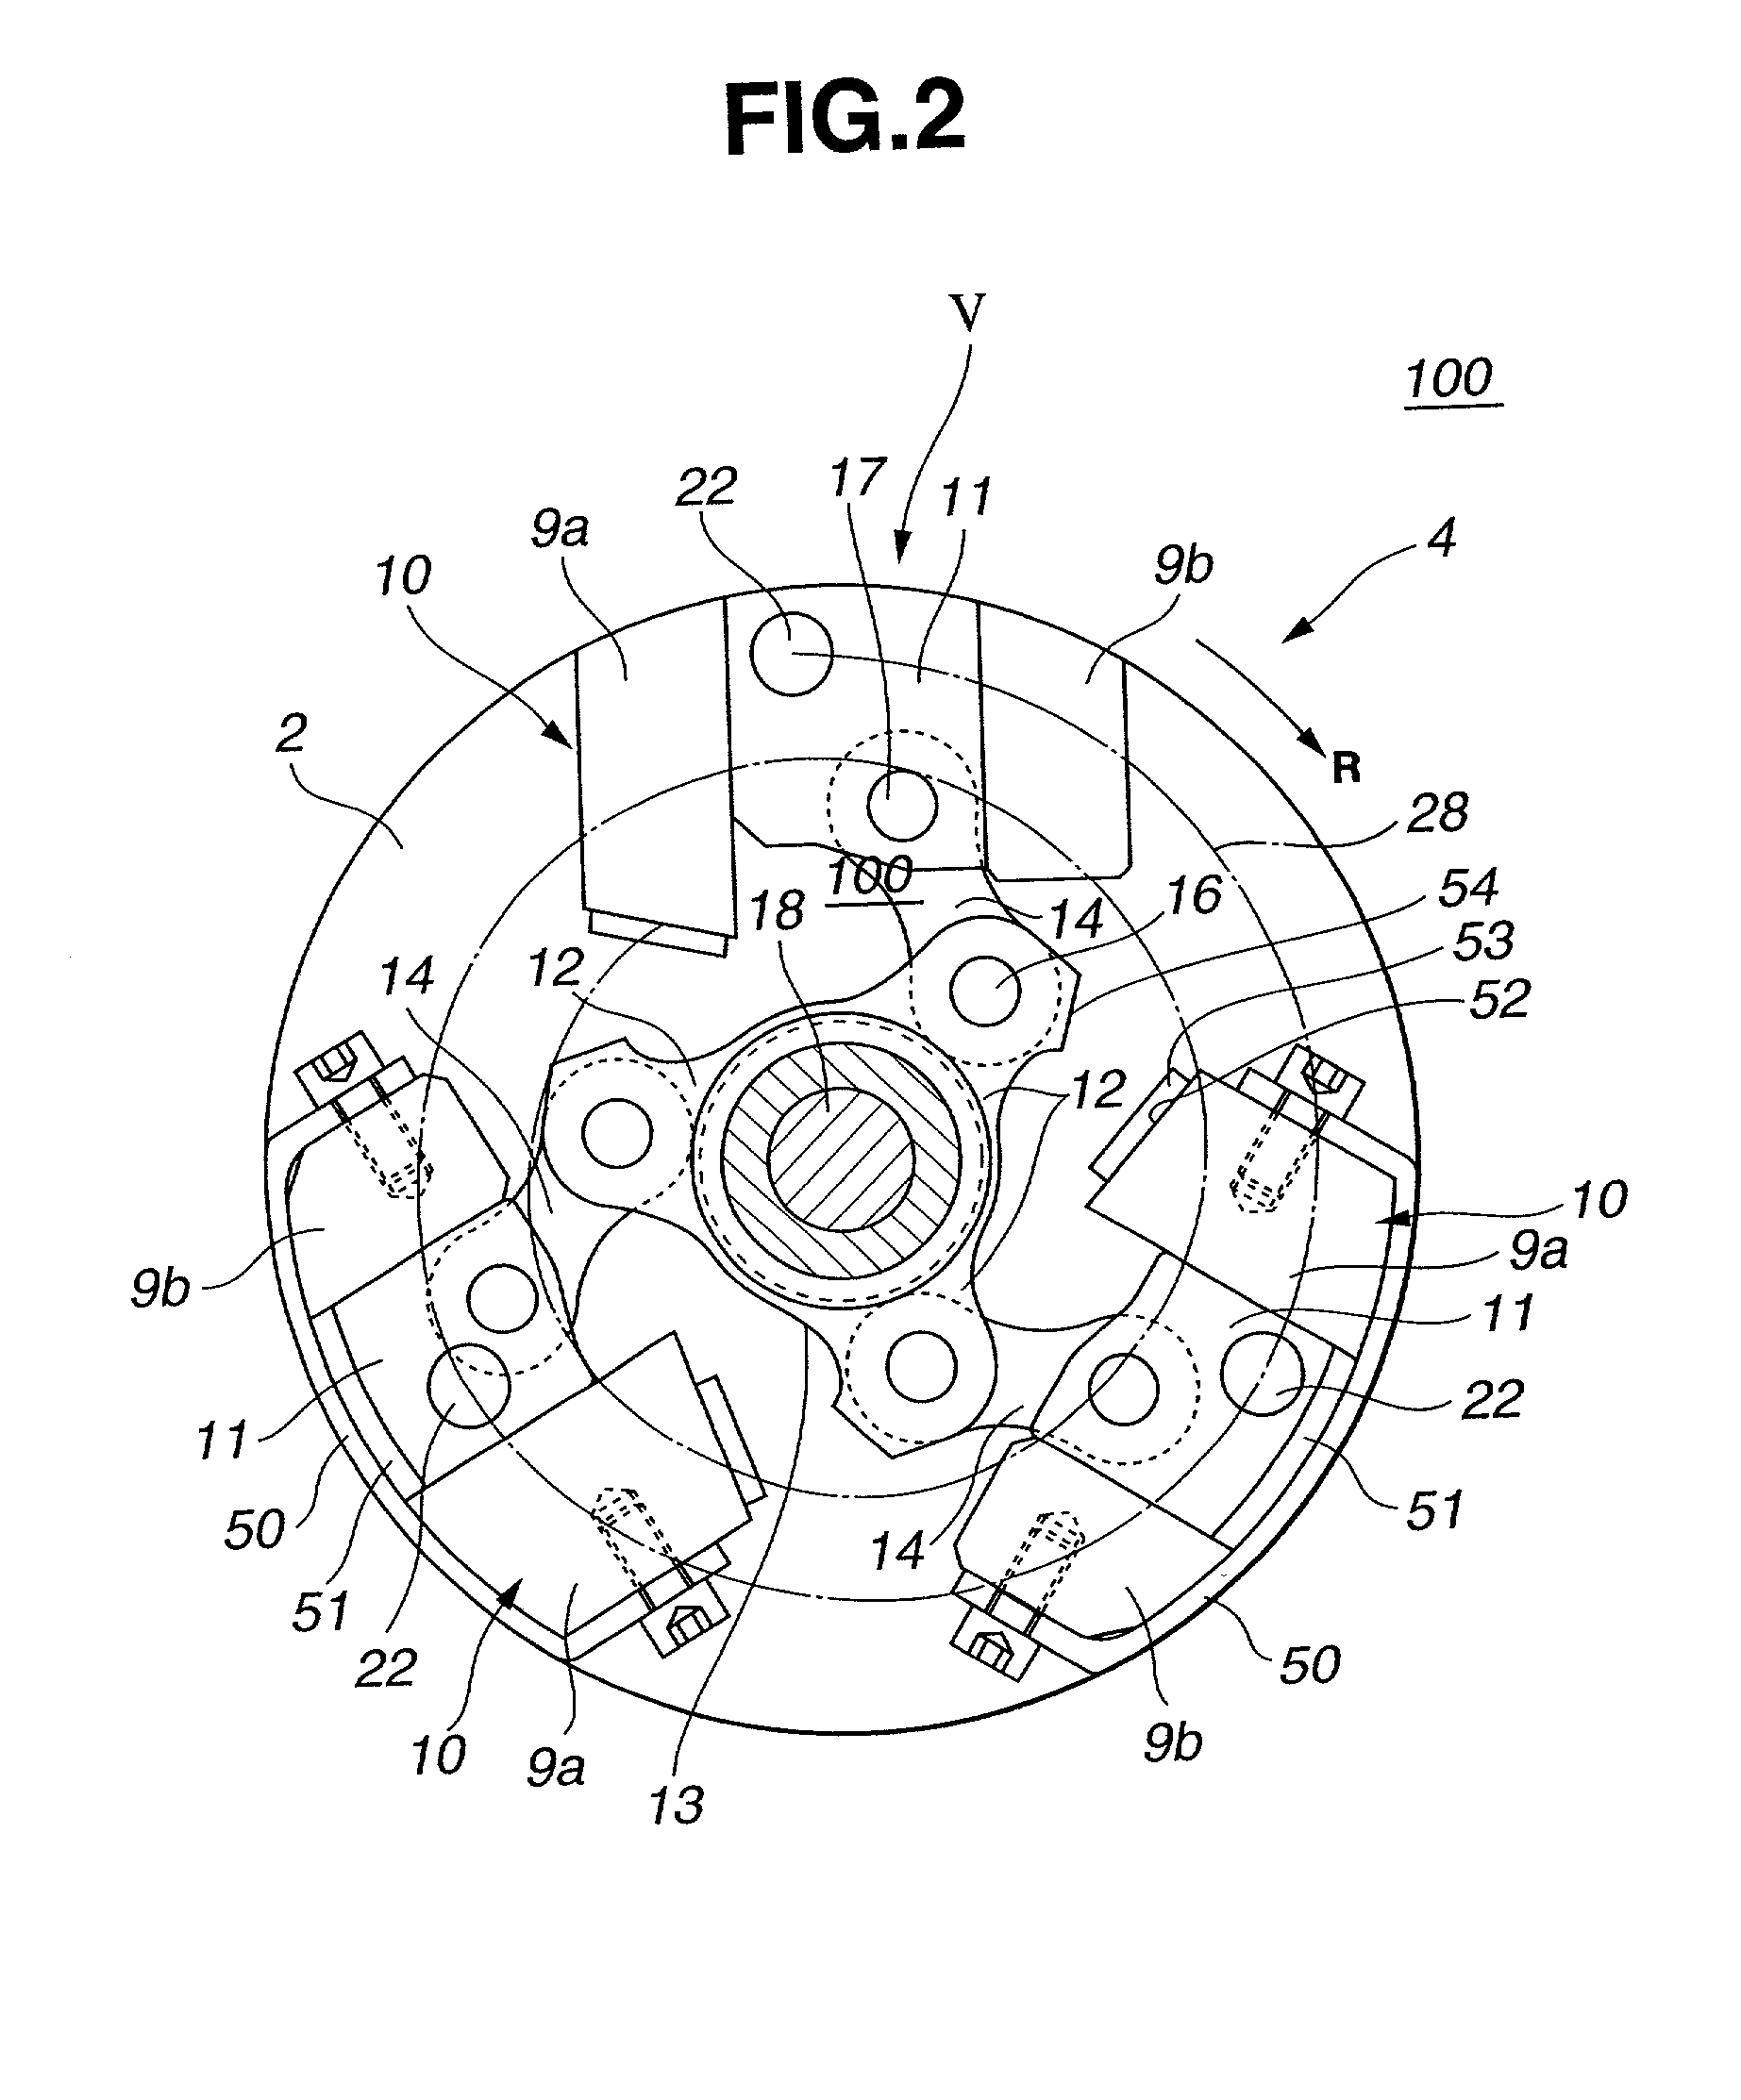 Valve timing control device fo internal combustion engine